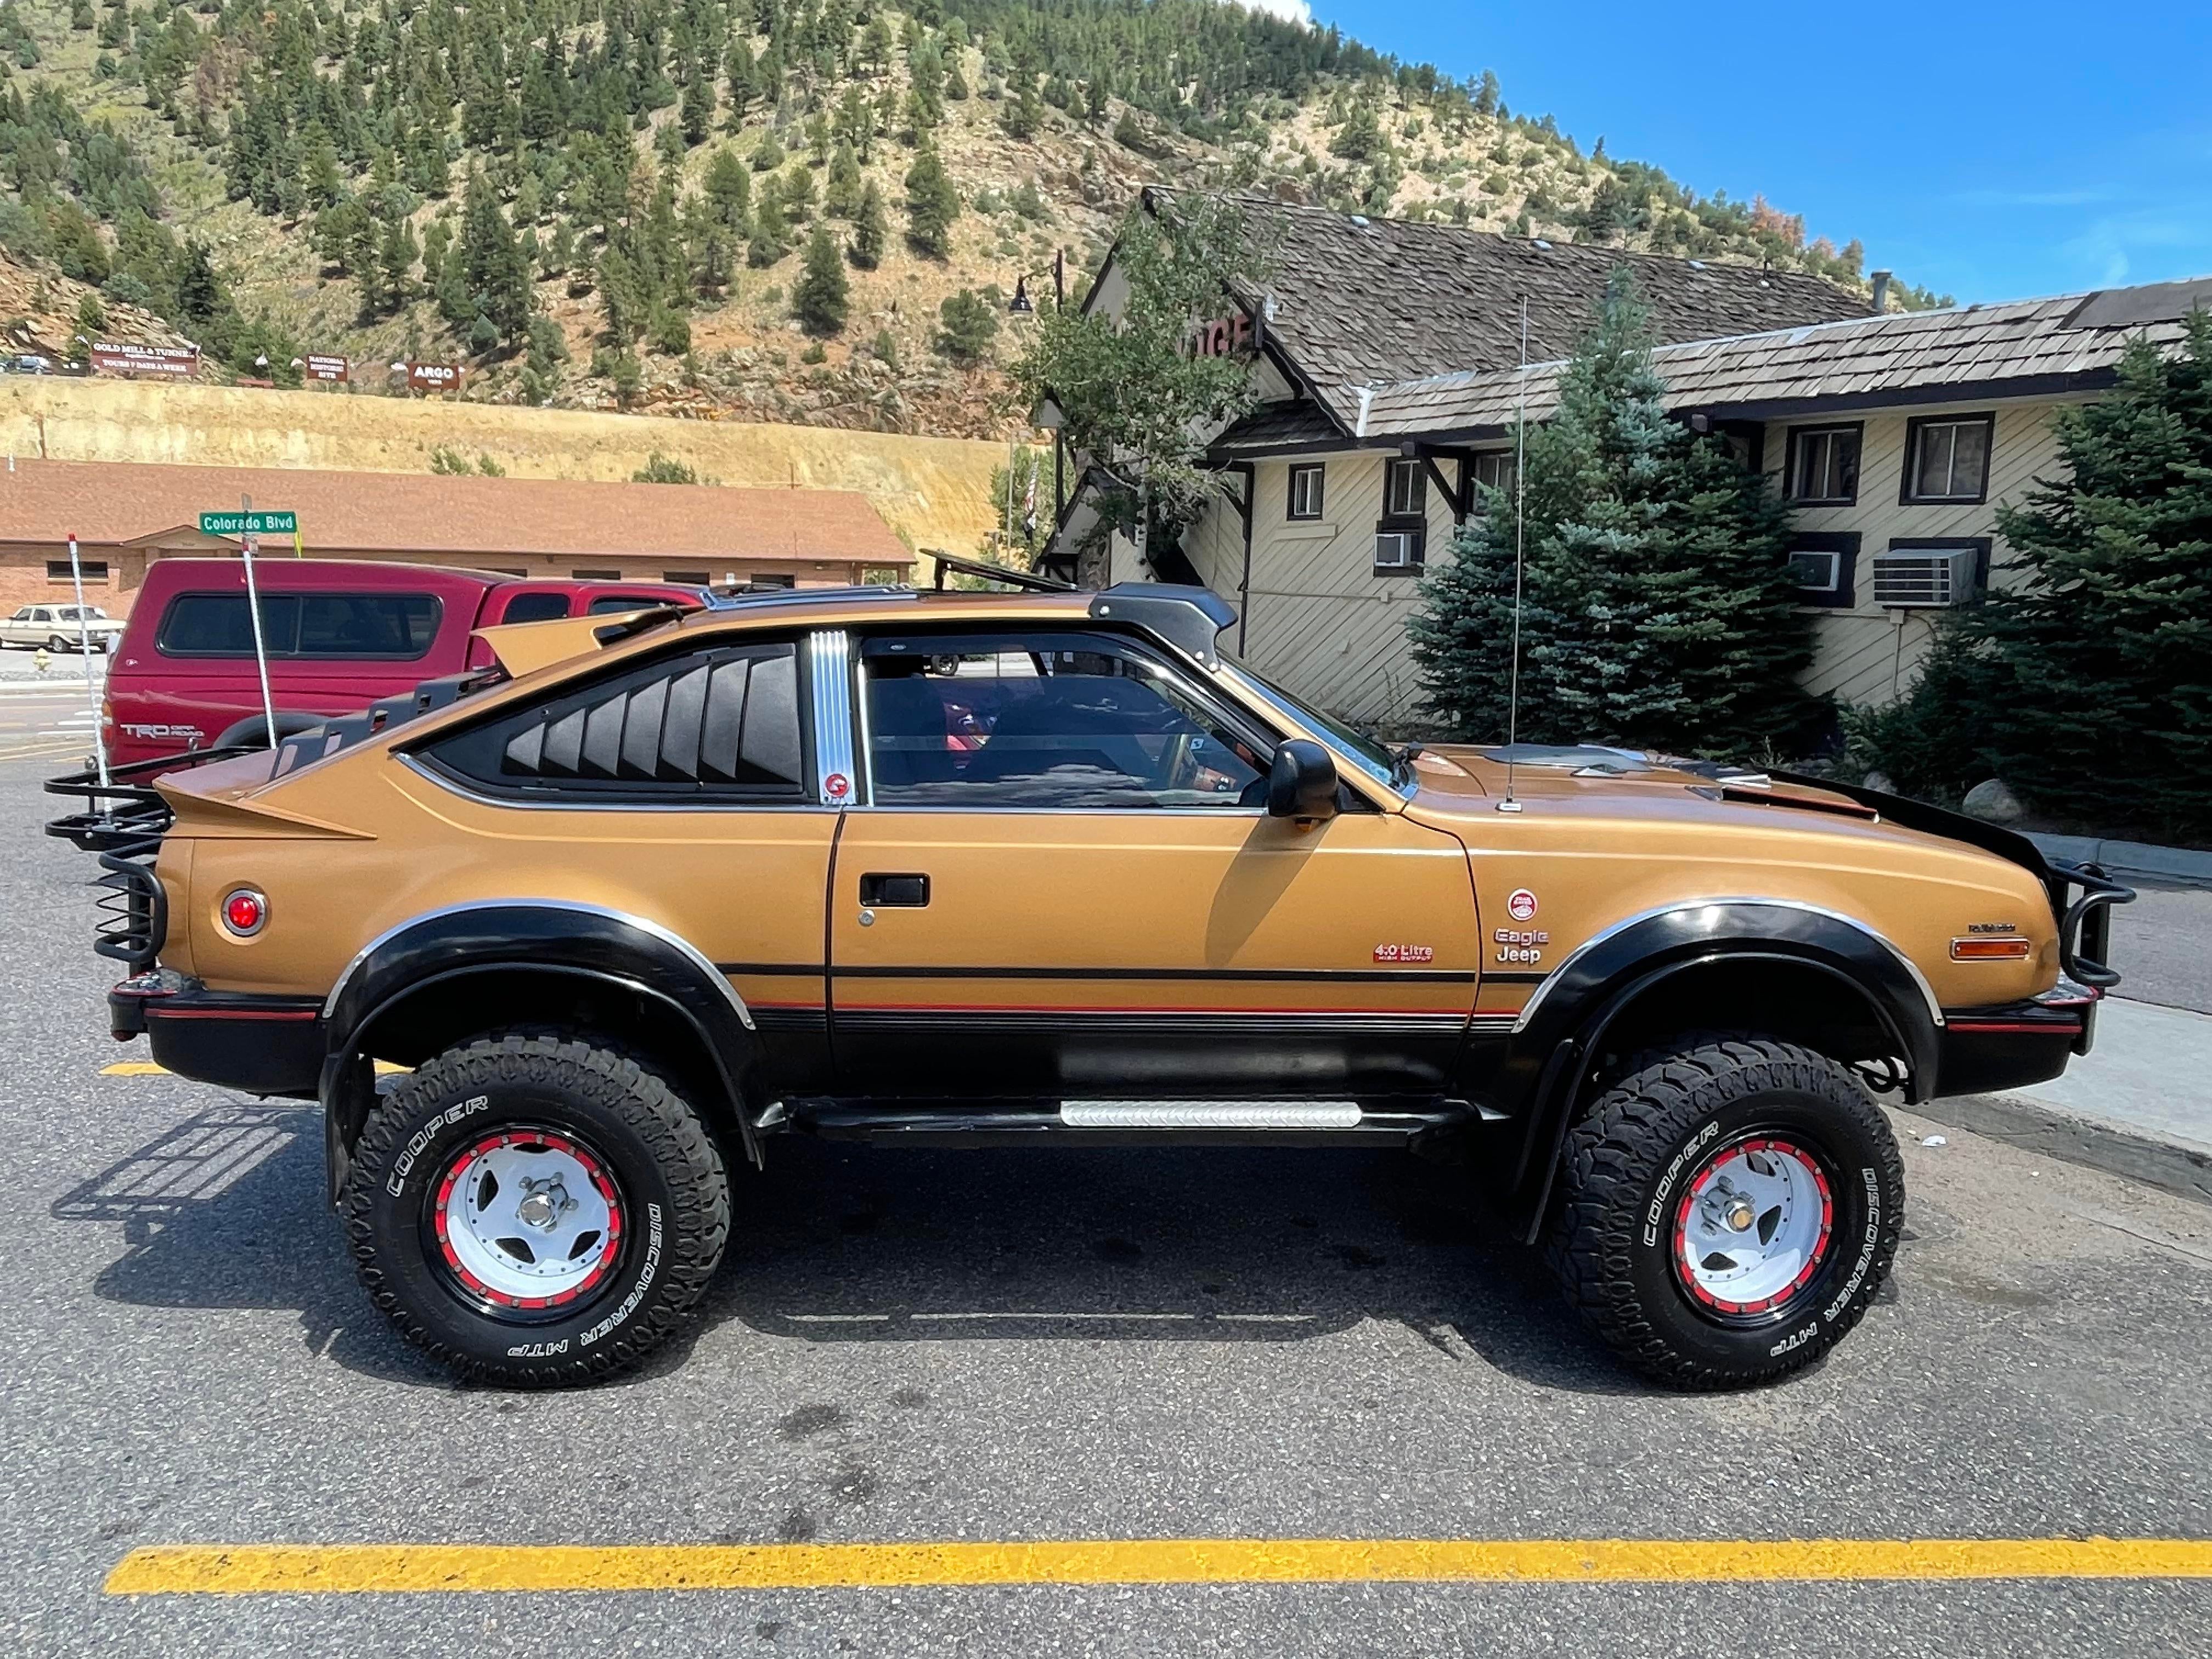 Was told you folks might appreciate this AMC Eagle 4x4 I saw the other day.  : r/Battlecars